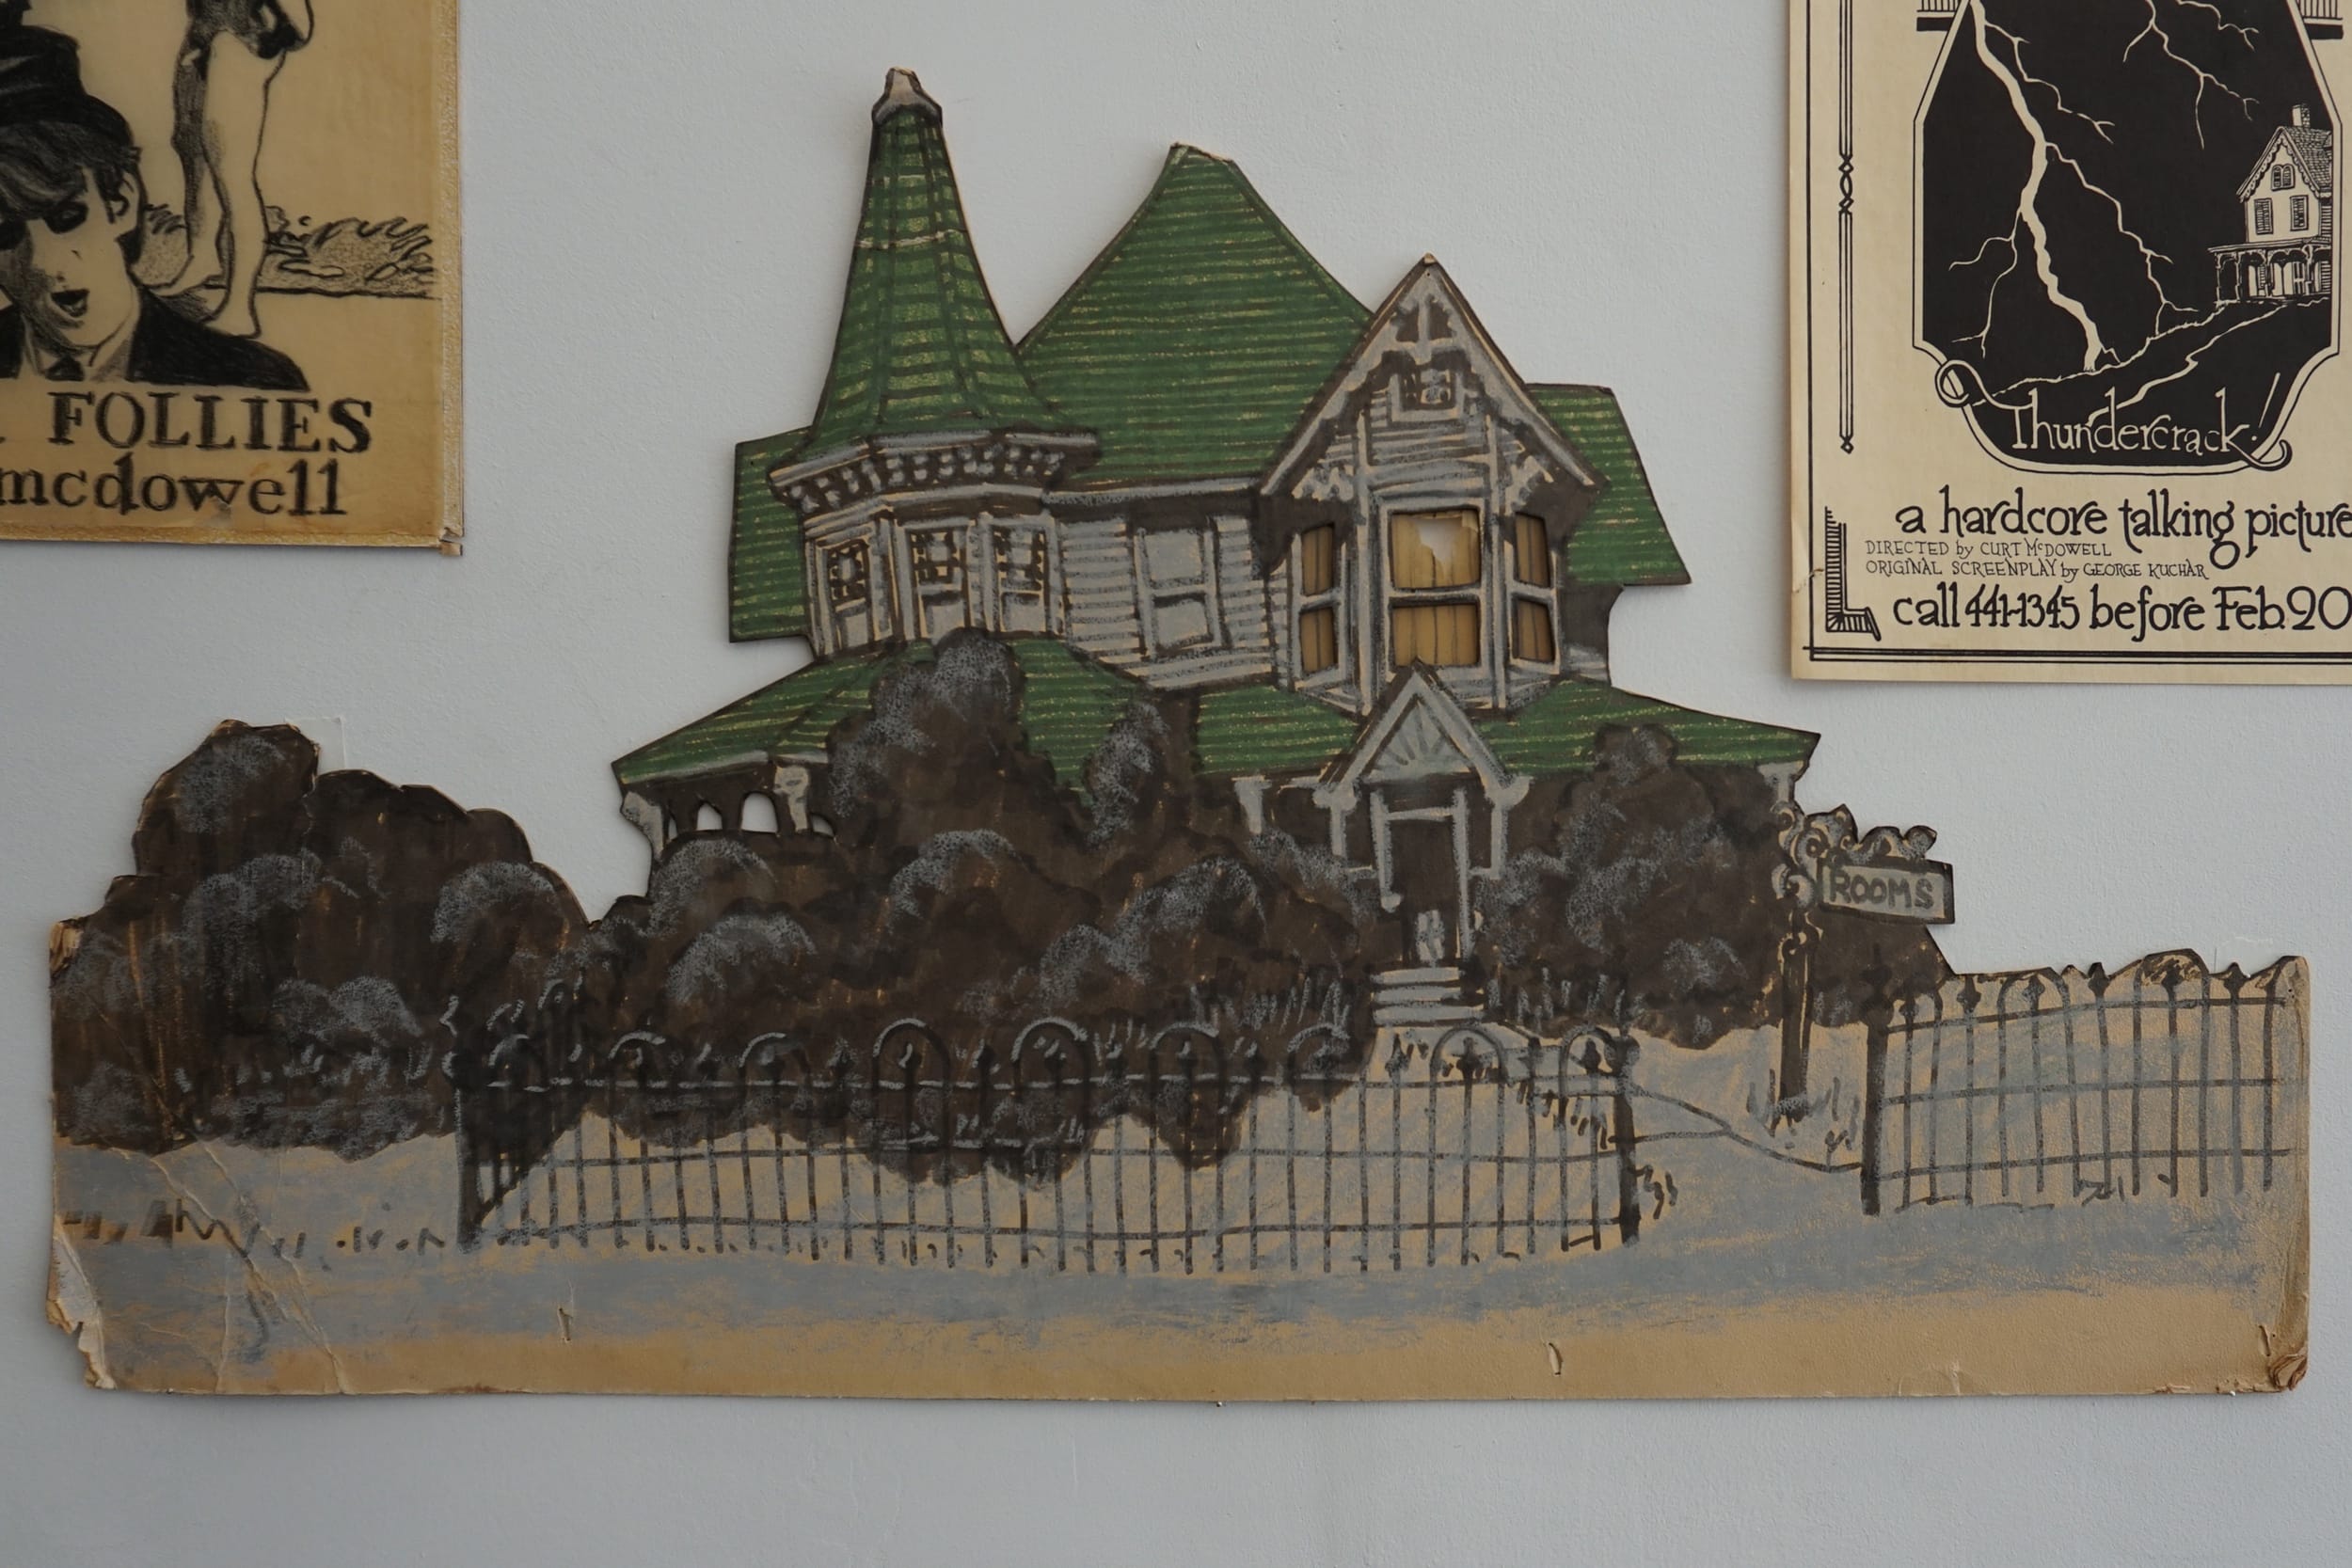  Curt McDowell  Thundercrack (set flat) , 1972-73 Watercolor, marker on paper/cardboard 28 x 16 inches 